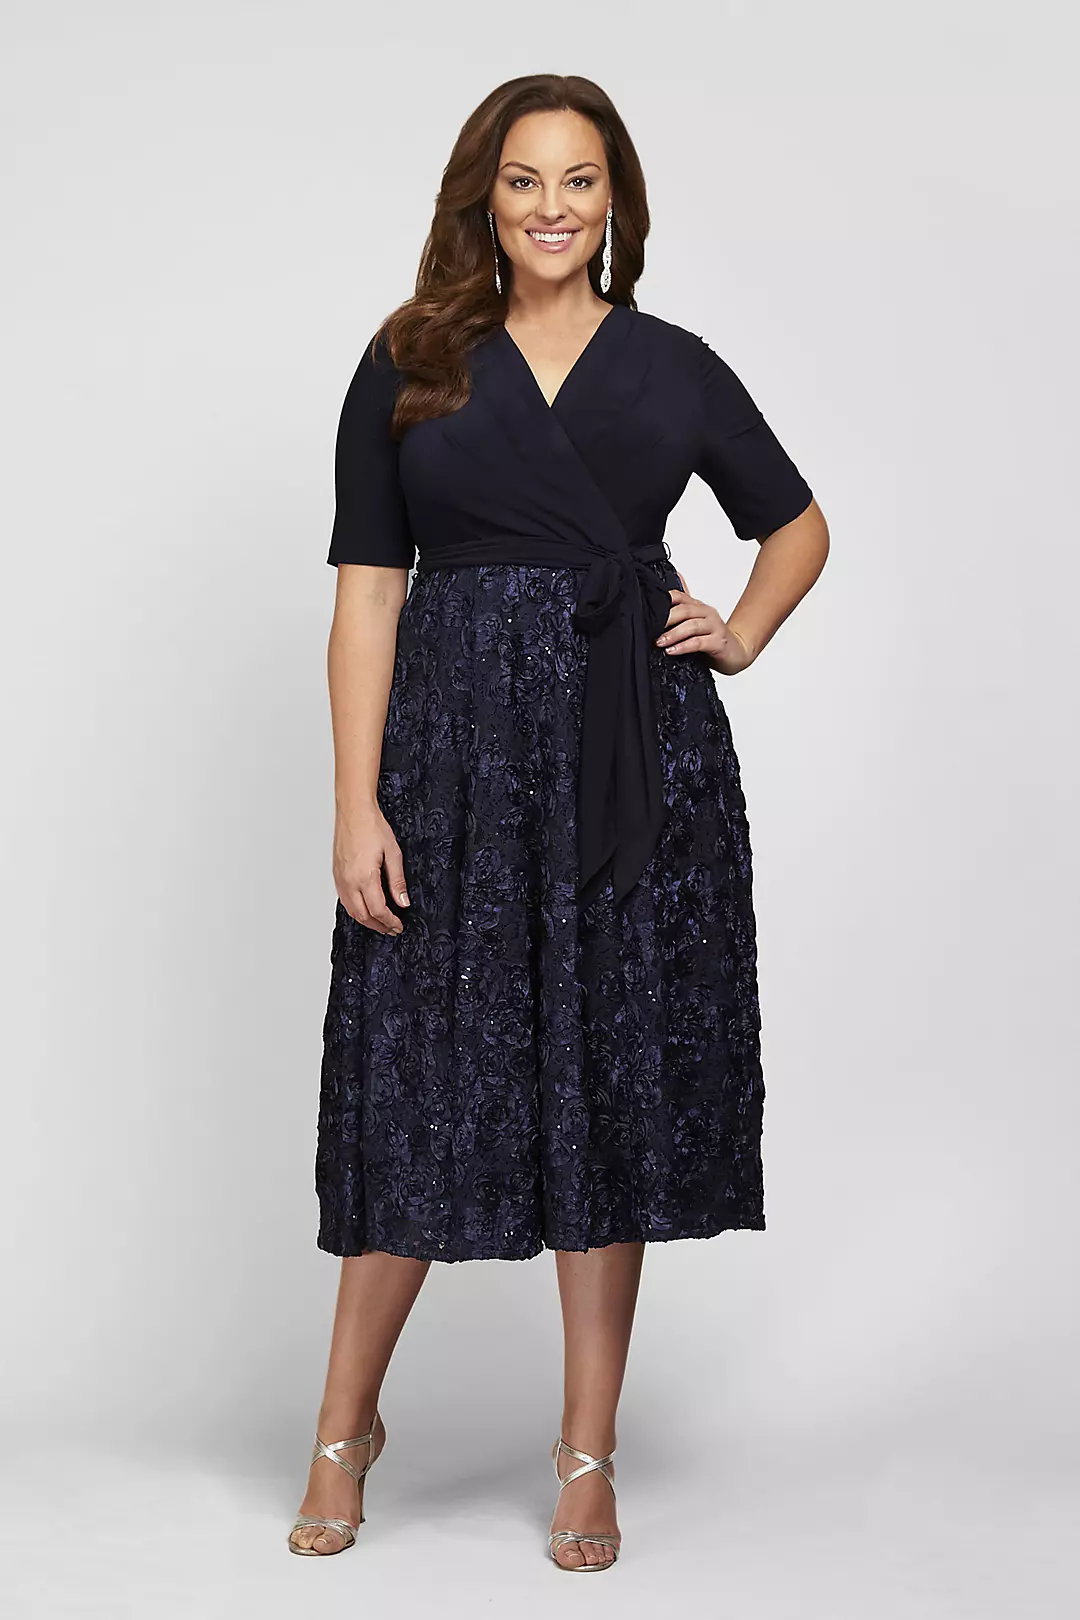 Sequin Lace Jersey Fit-and-Flare Plus Size Dress  Image